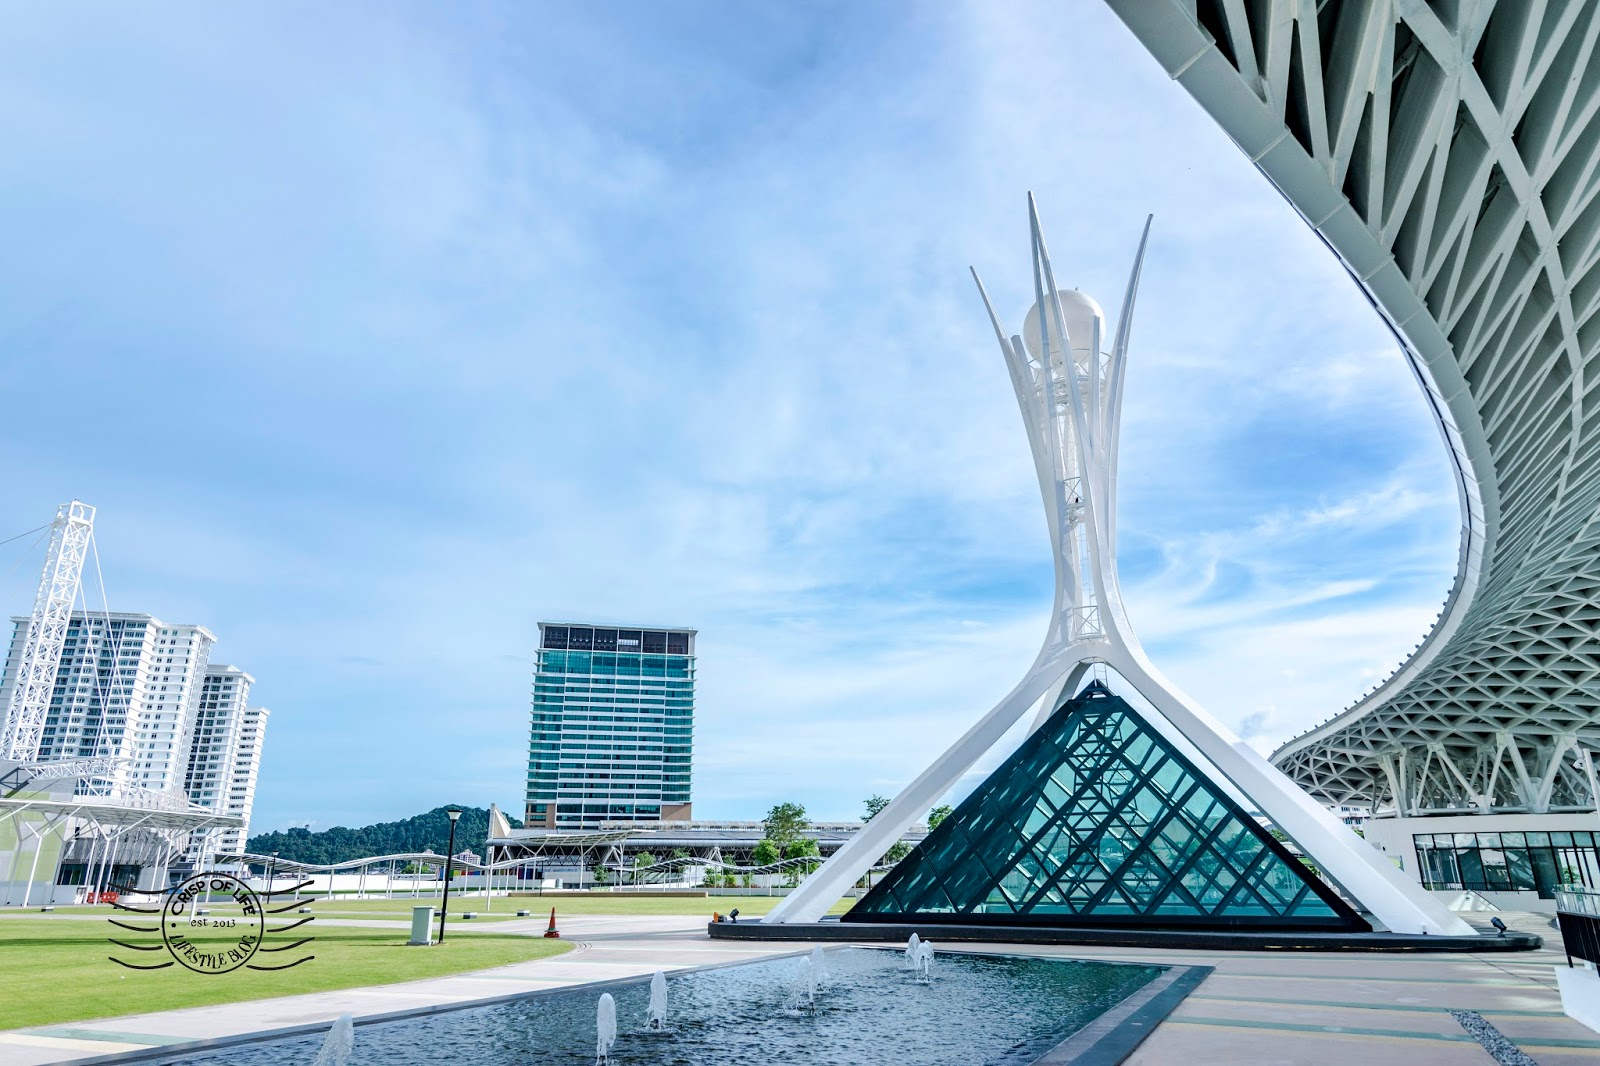 Setia SPICE Convention Centre & Arena in Penang